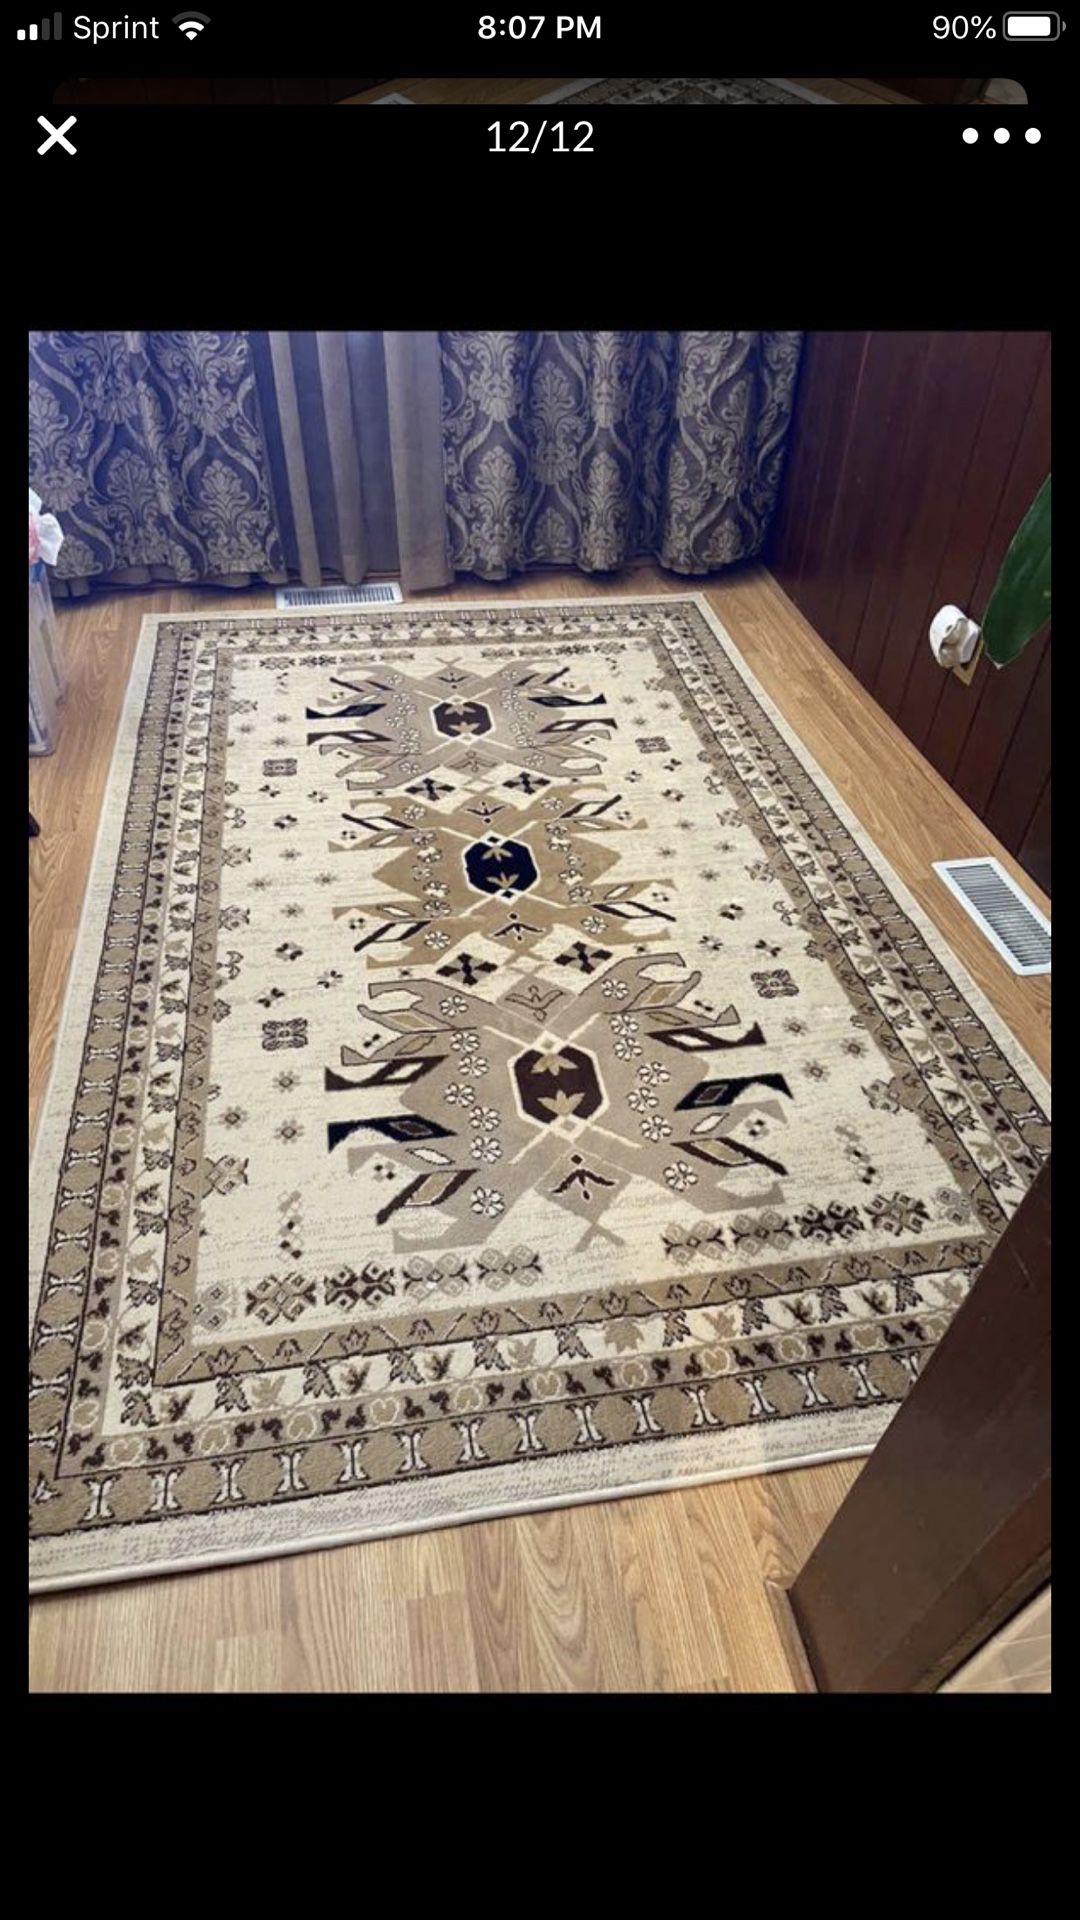 2 identical rugs